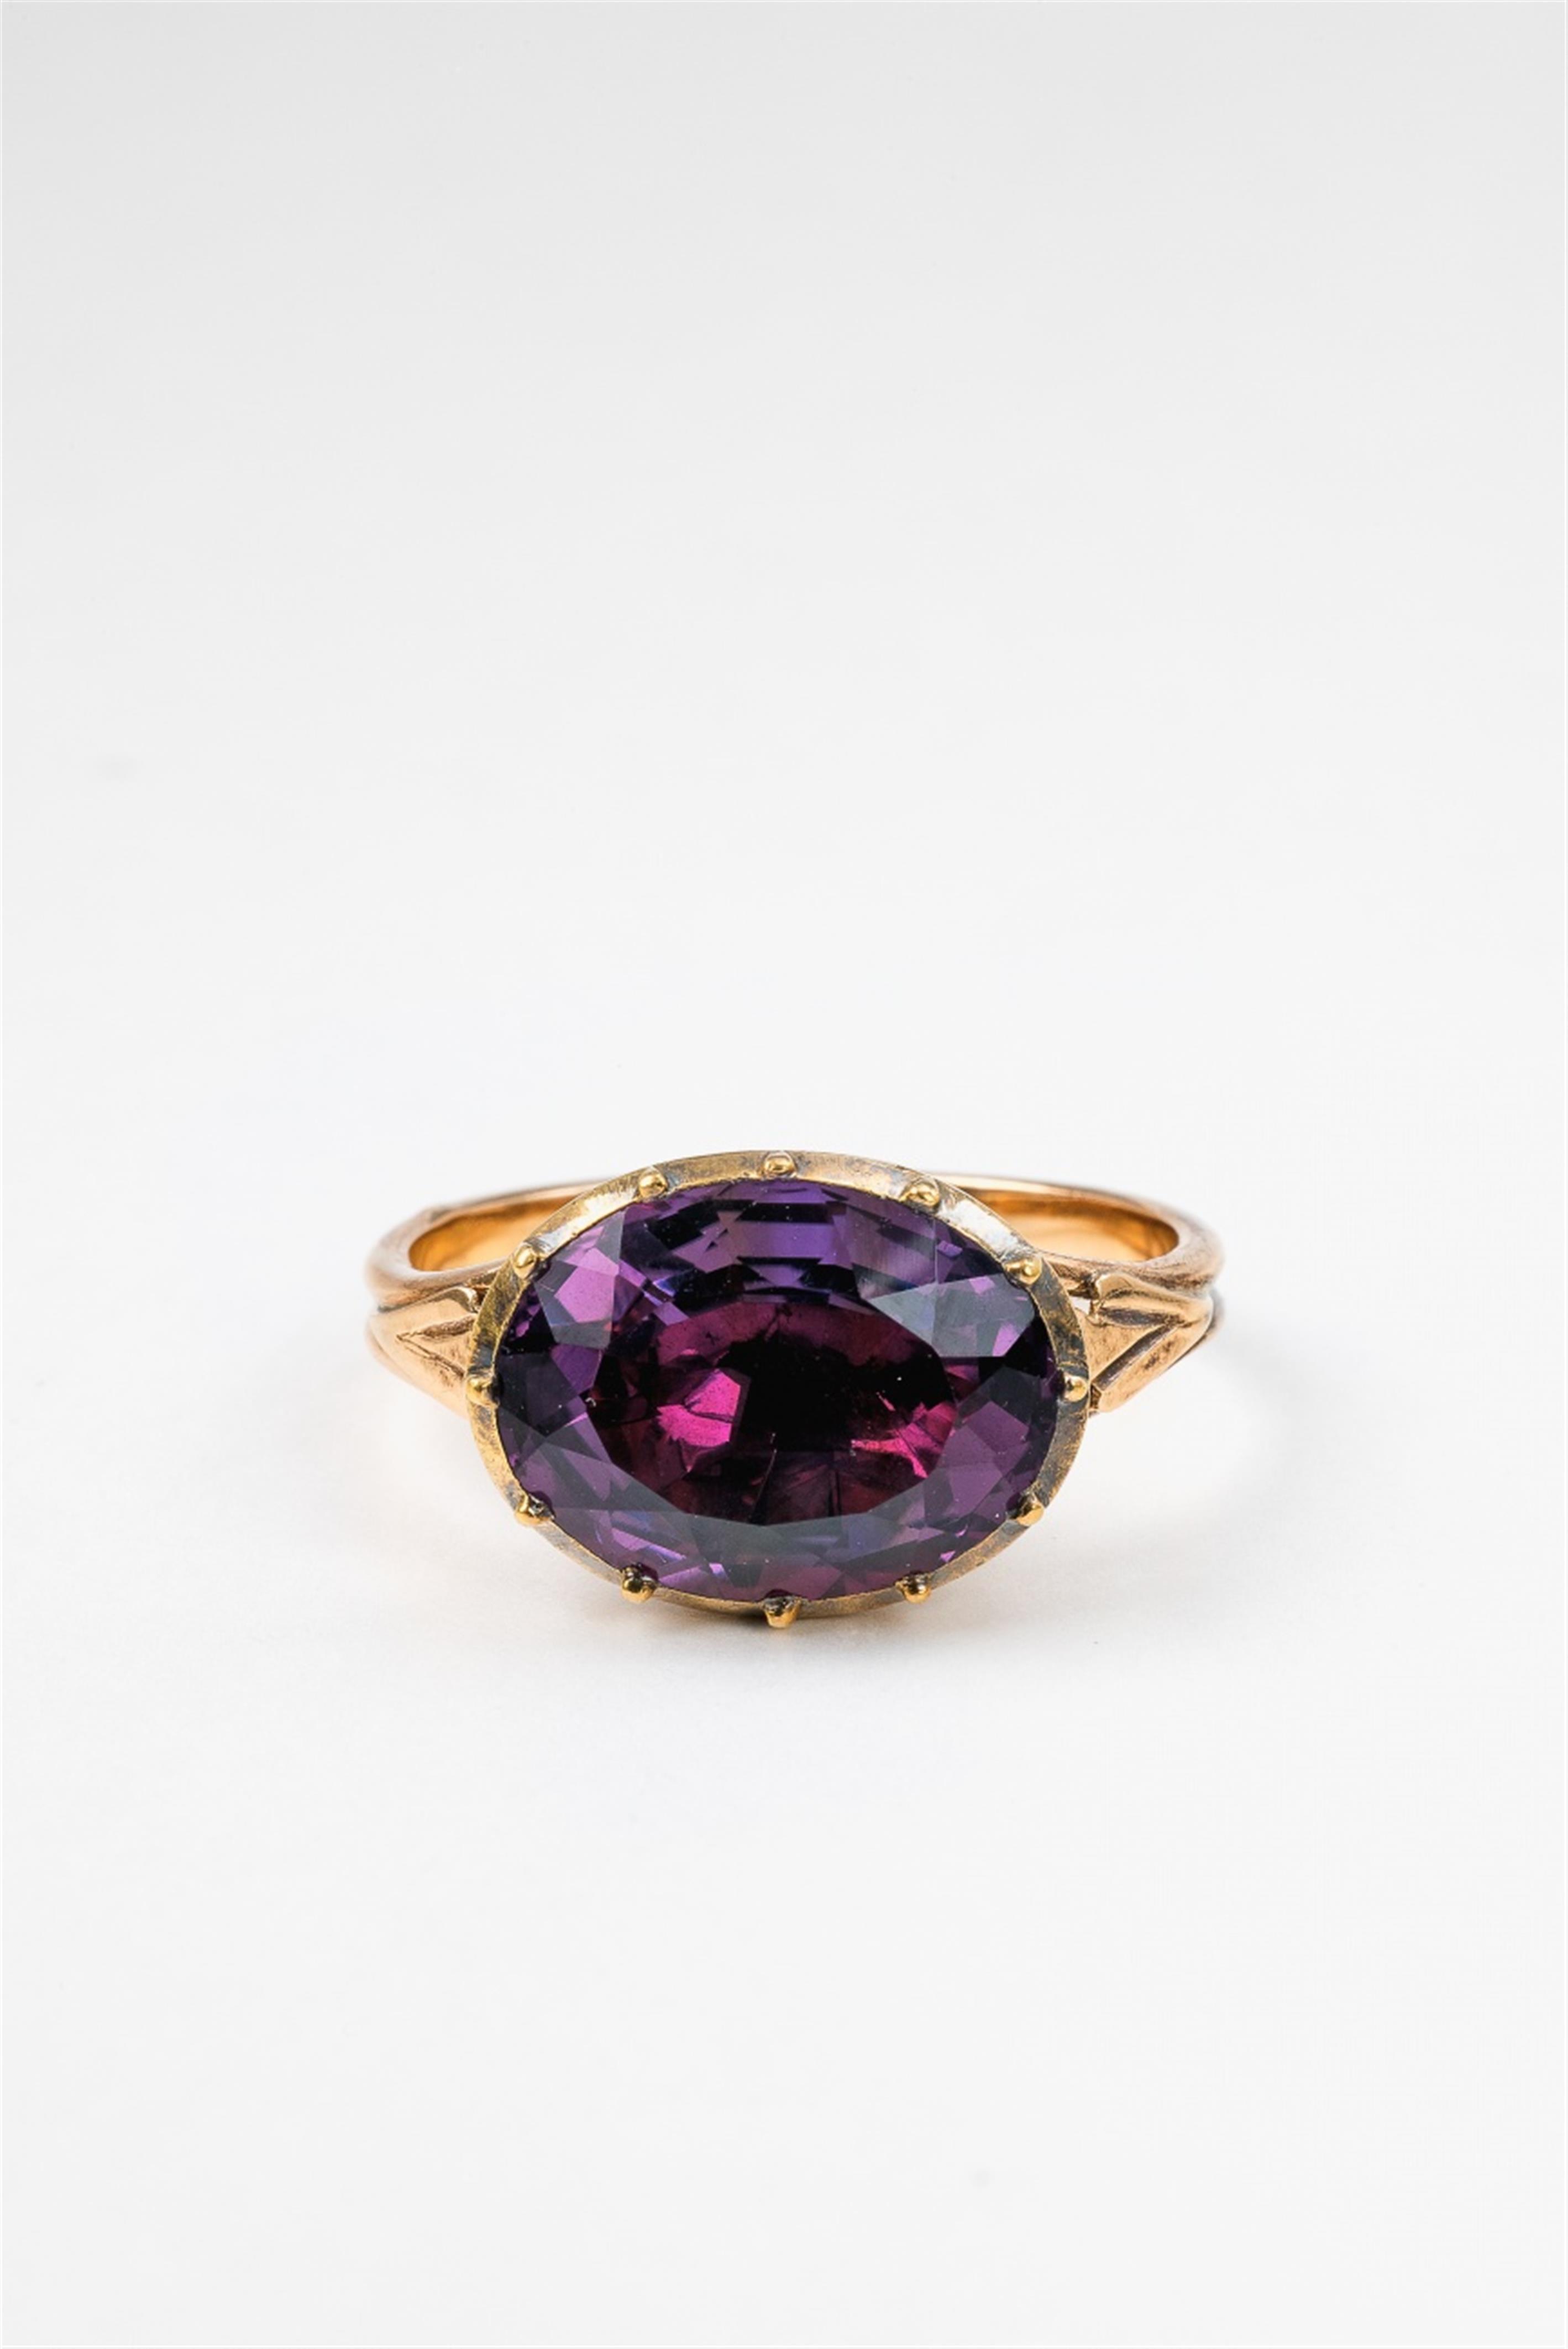 An 18k gold and amethyst gentleman's ring - image-1